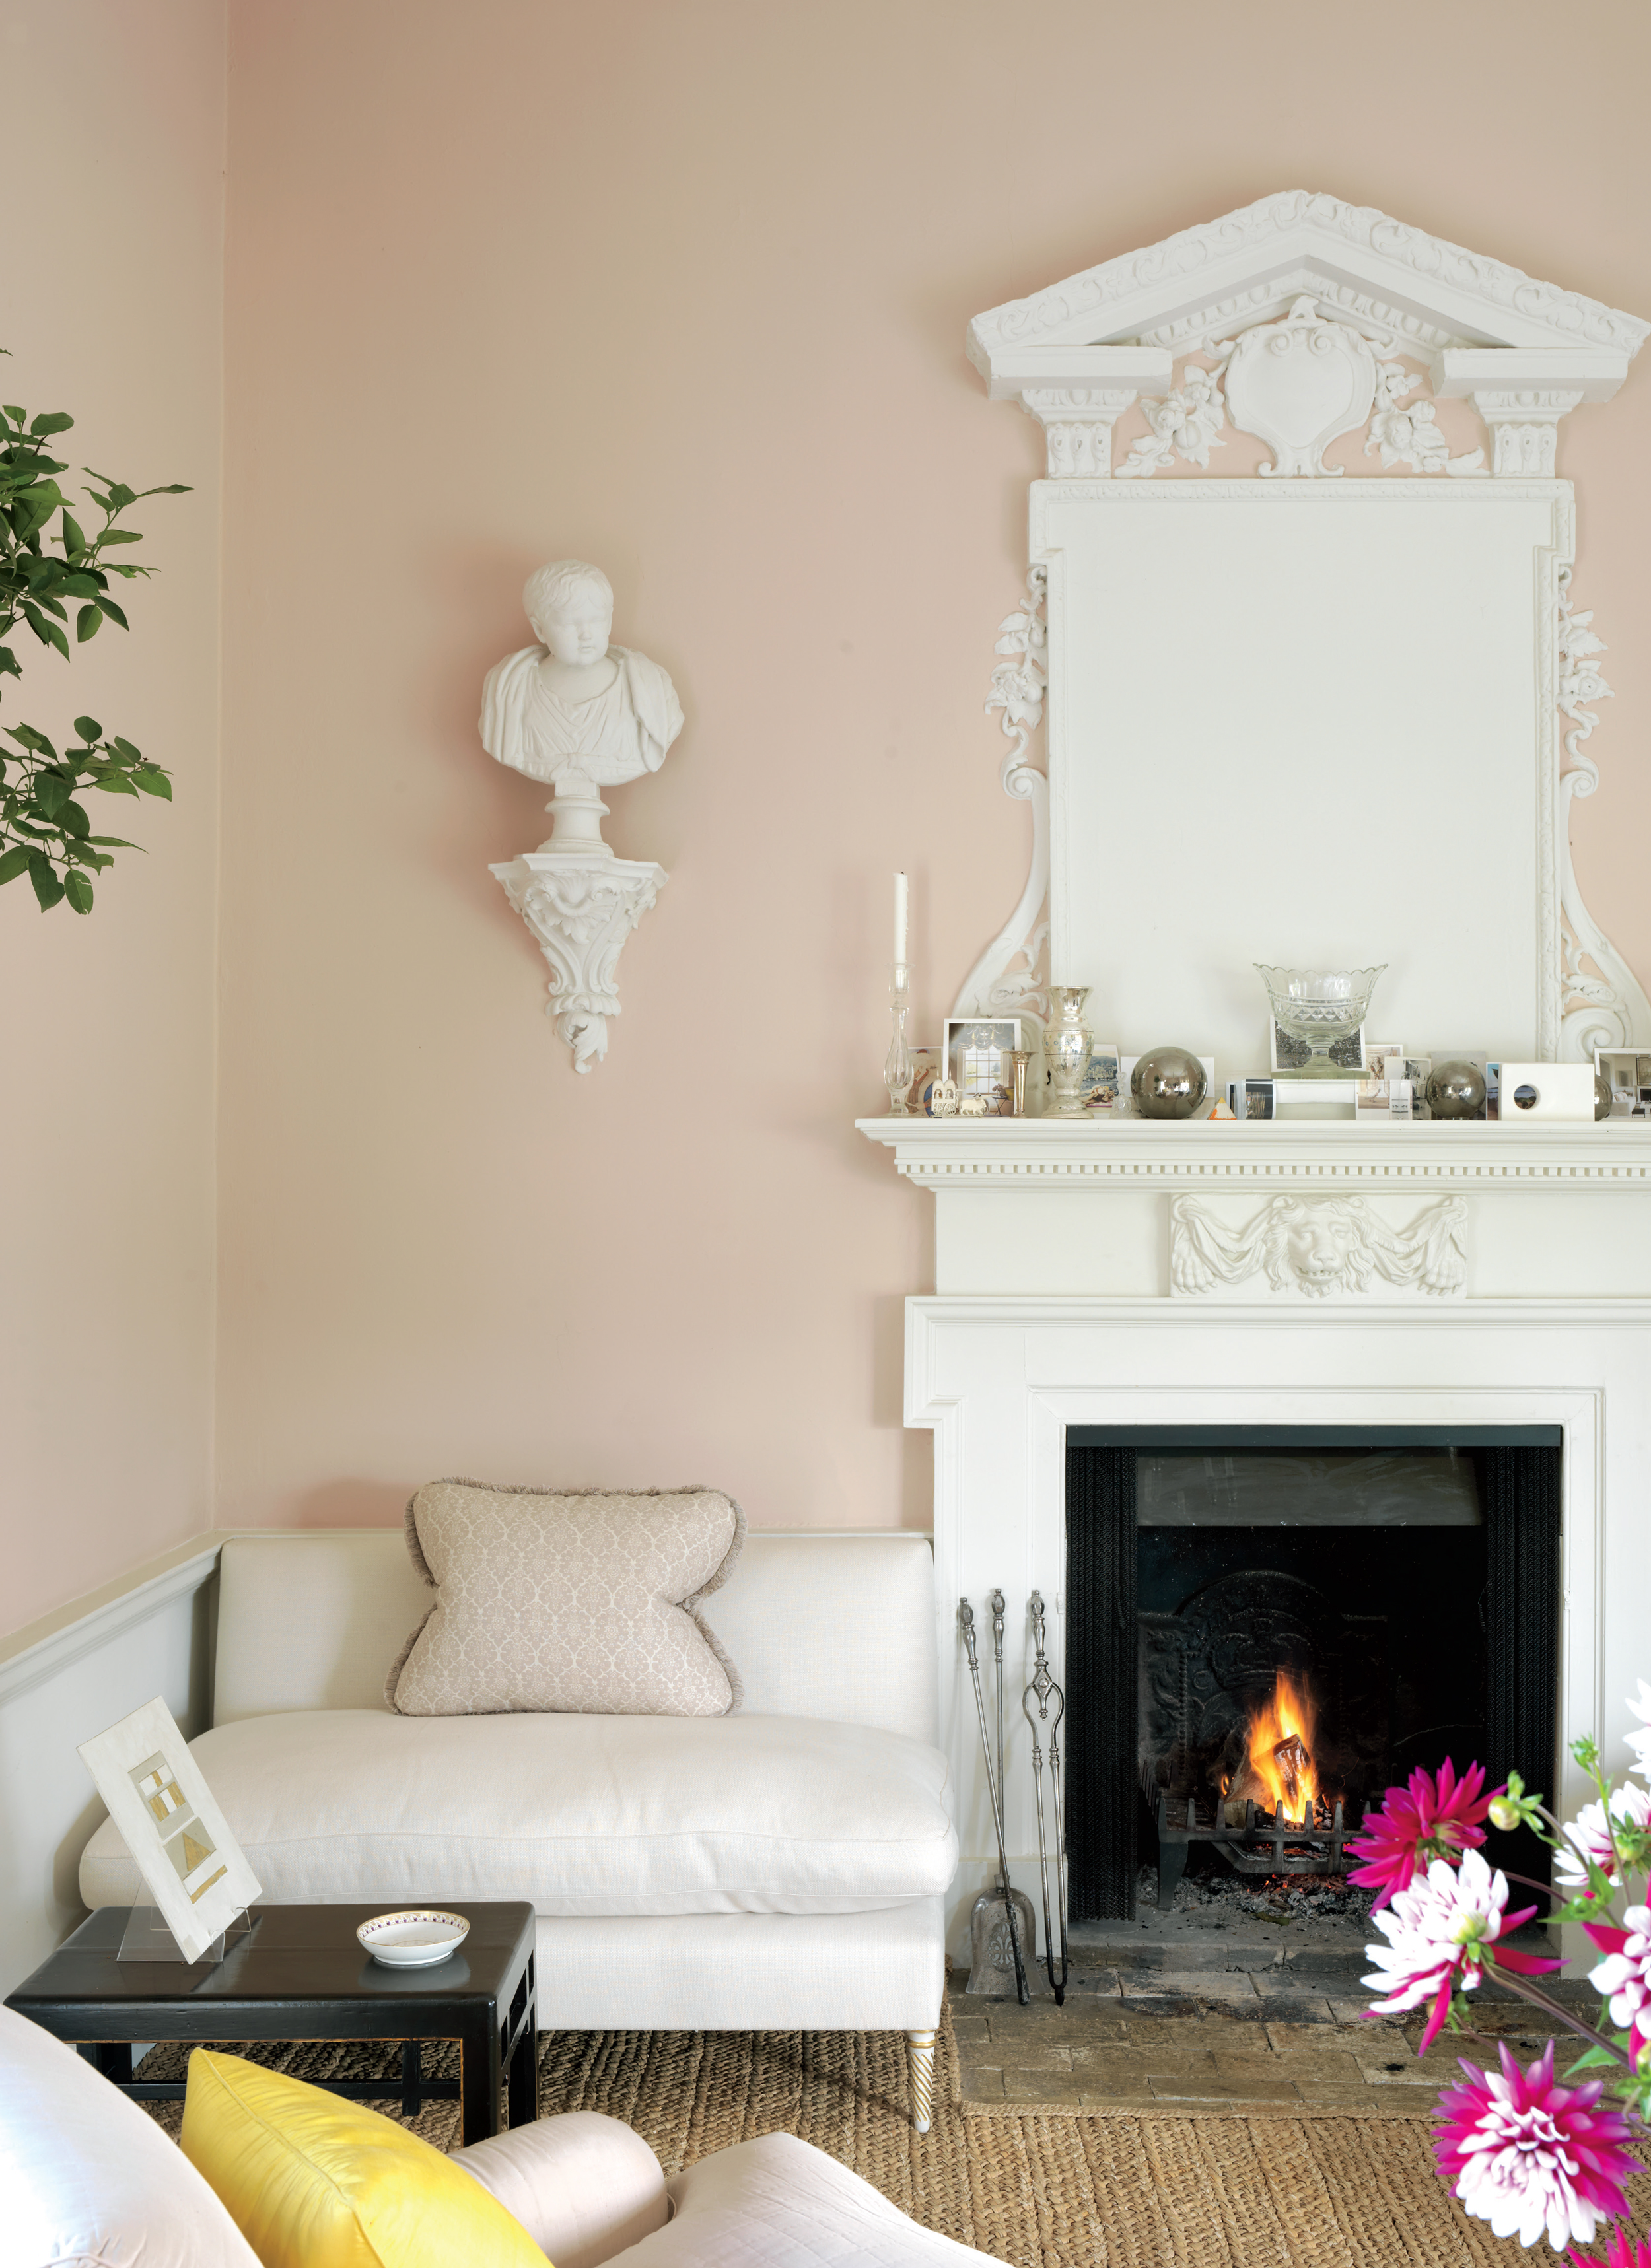 Veere Greeney: A Point of View Pink Walls Living Room Fireplace The Temple